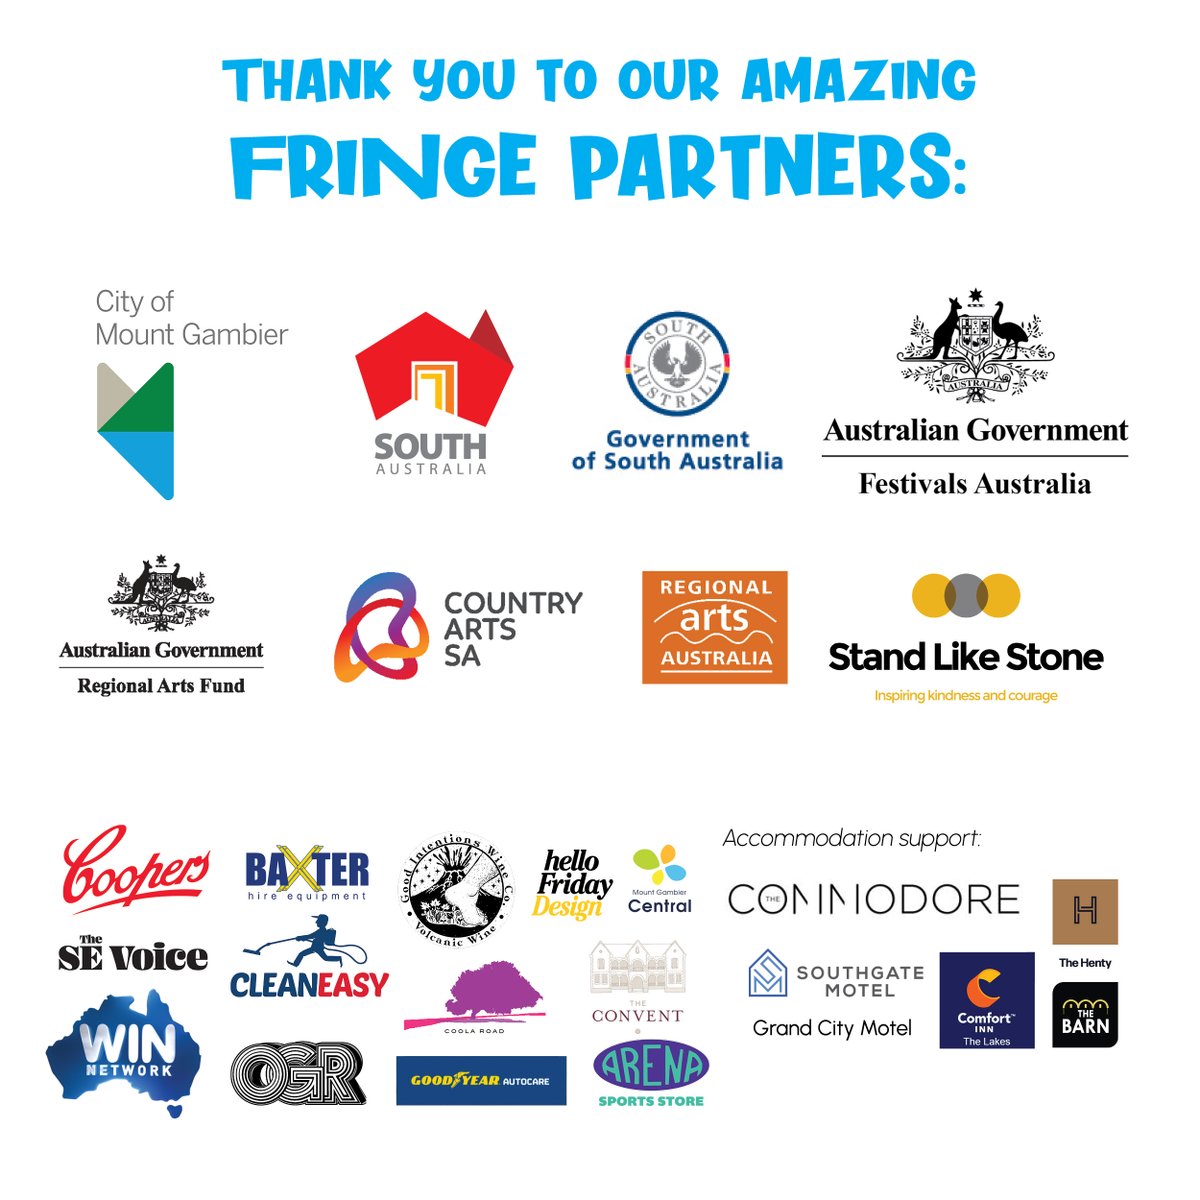 Only a couple of sleeps before the 2022 Fringe Festival kicks off! None of this would have been possible without our amazing supporters.
A huge FRINGE CHEERS to everyone who helps us host SA's largest regional open-access arts festival.
#fringemountgambier #eventssouthaustralia